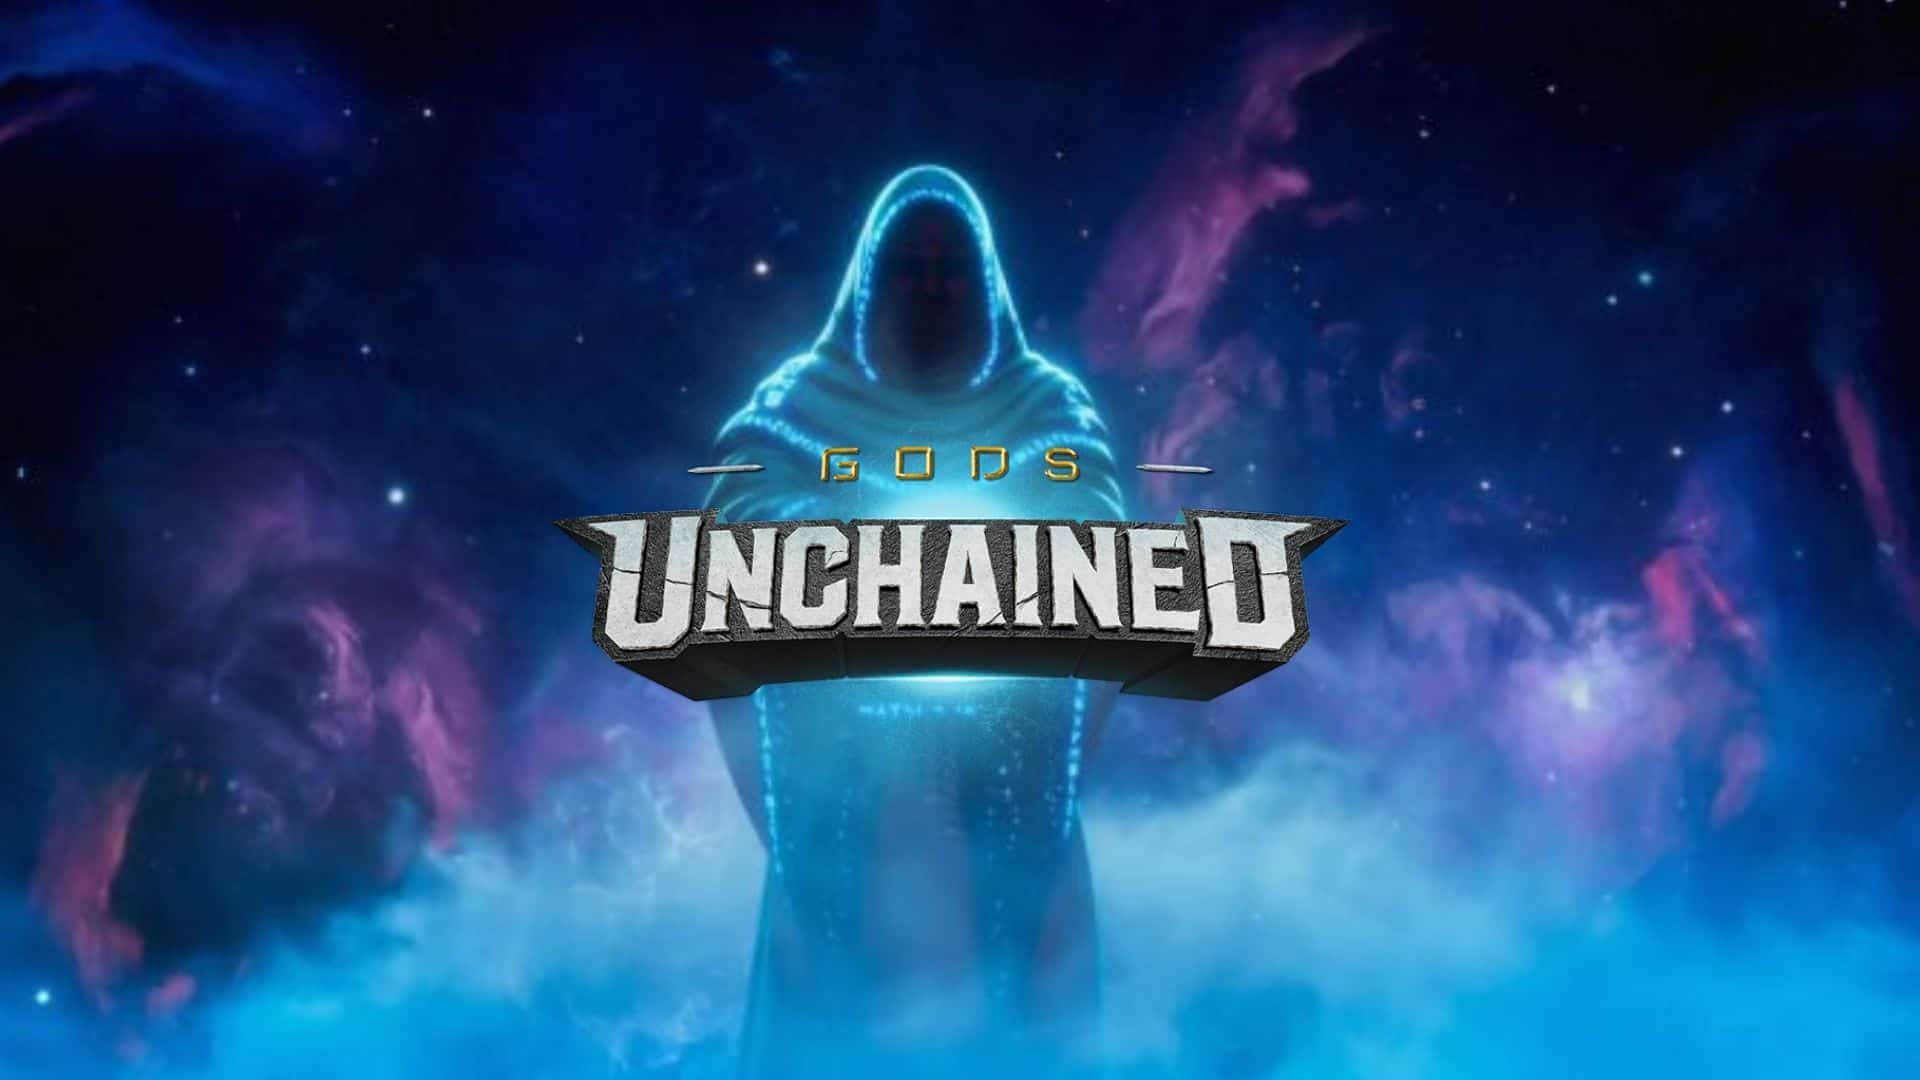 Gods Unchained Updates Terms of Service to Ban Multi-Accounting